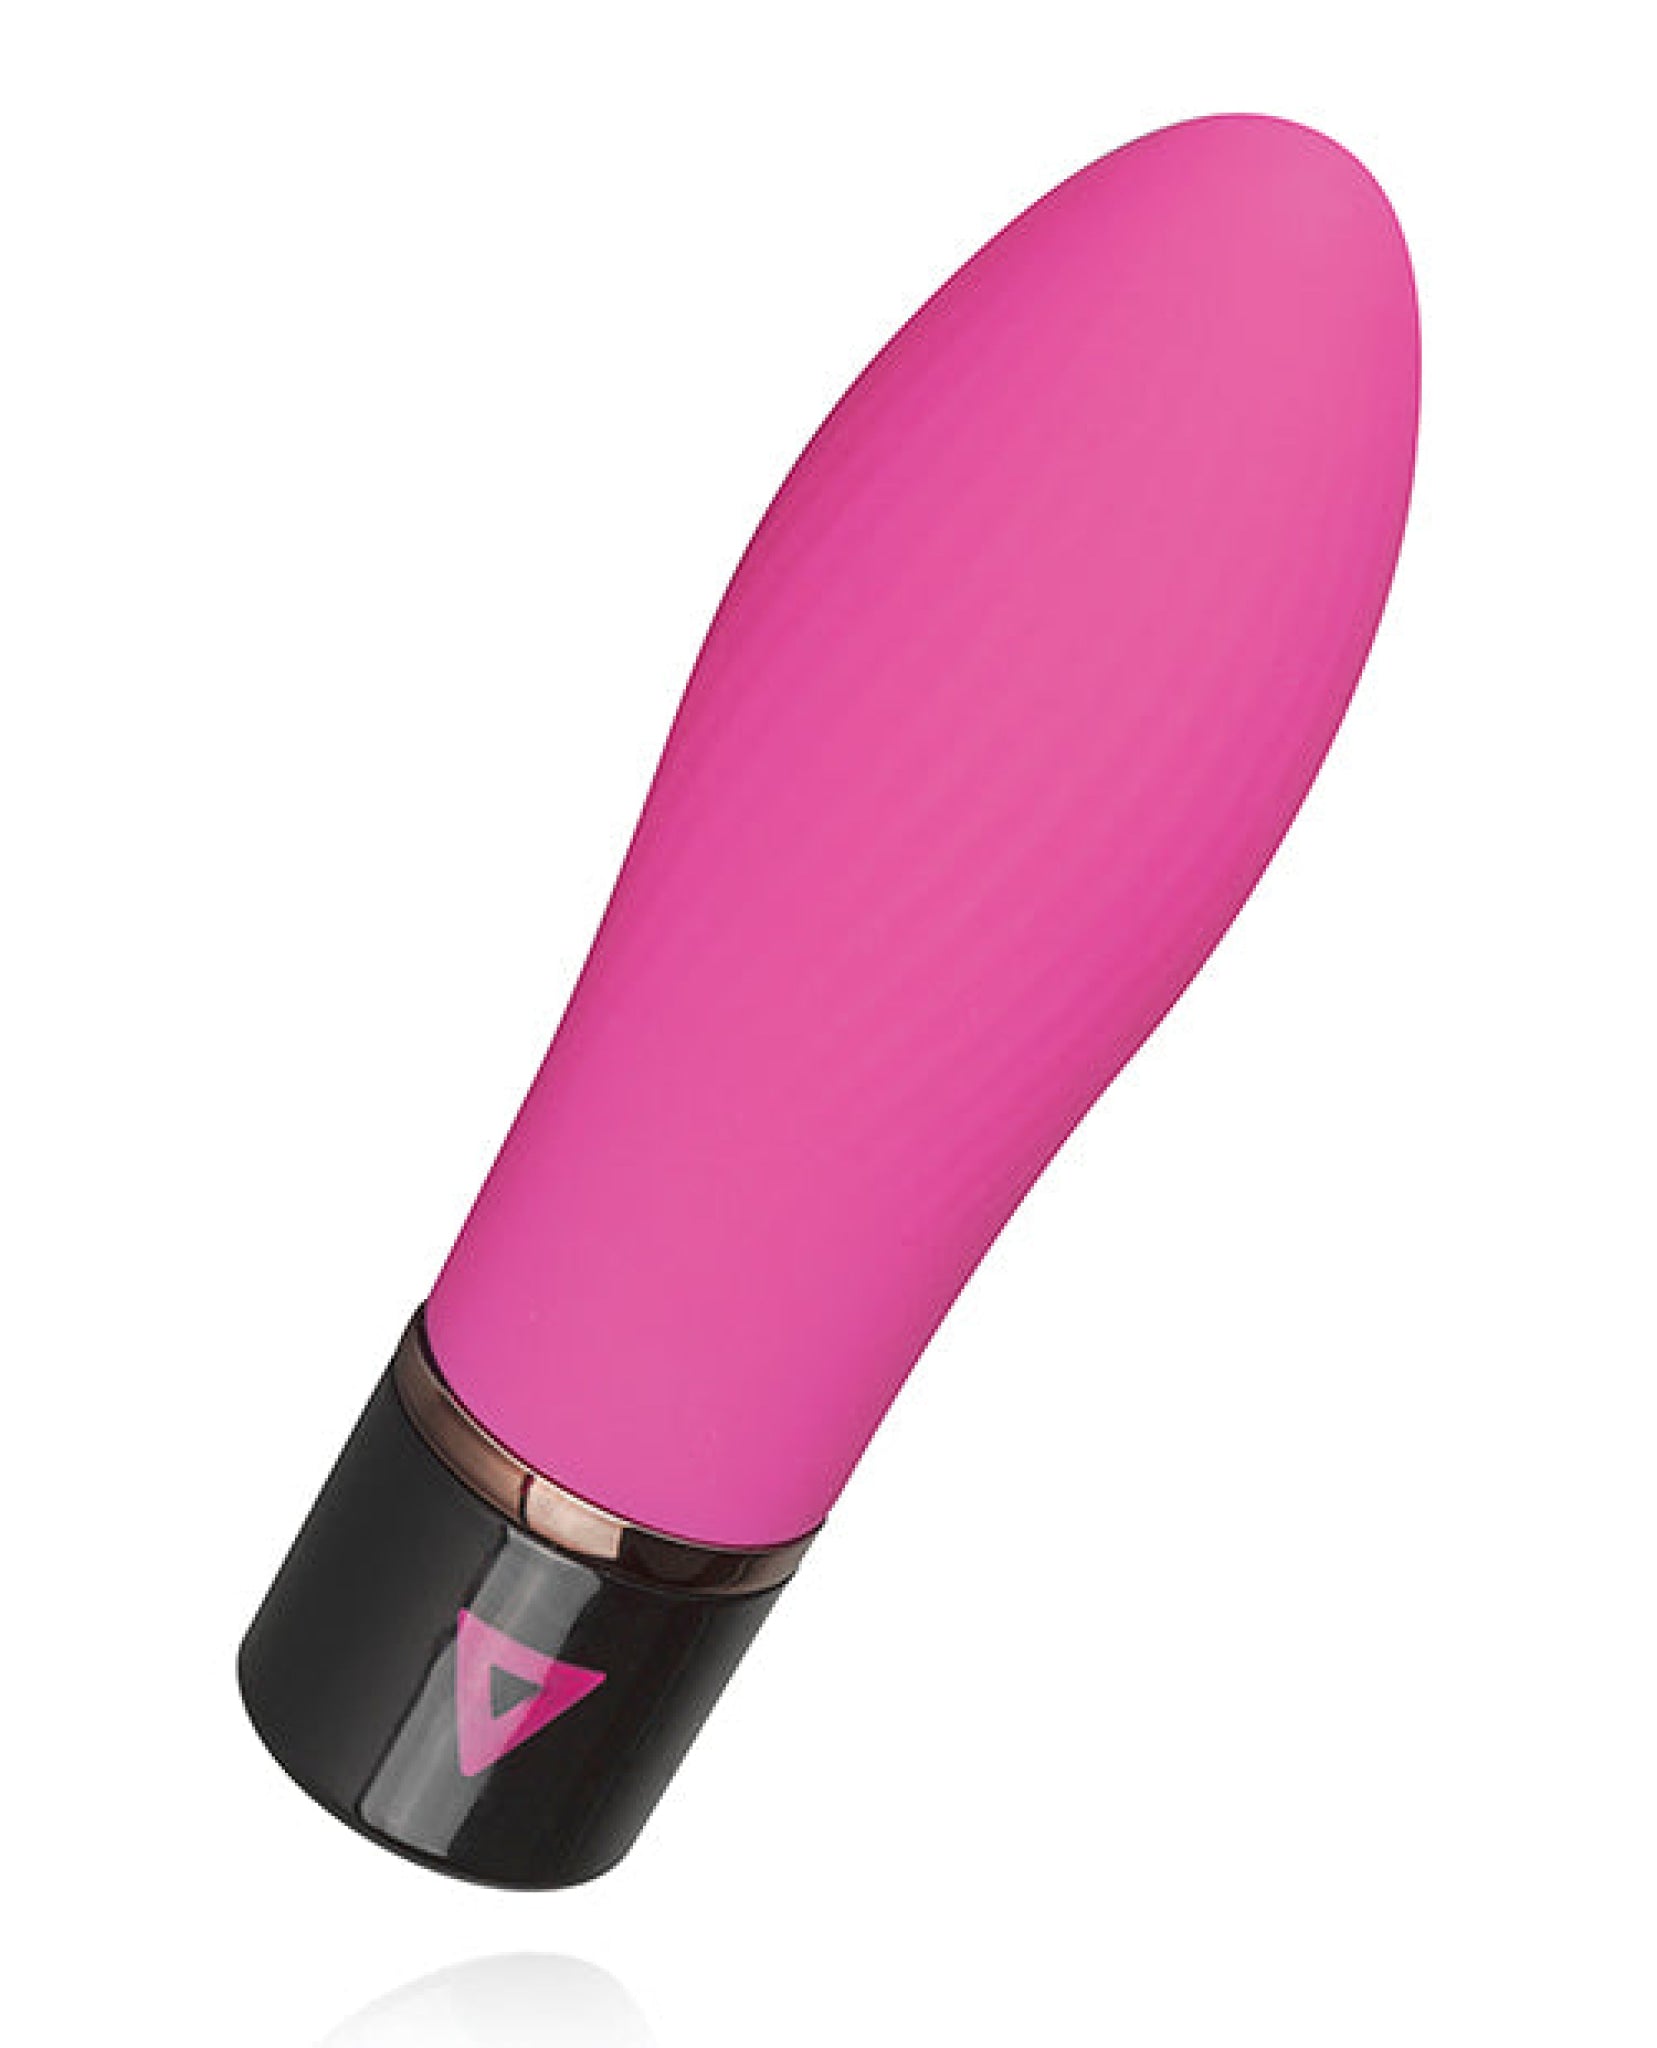 Lil' Vibe Swirl Rechargeable Vibrator - Pink Easy Toys